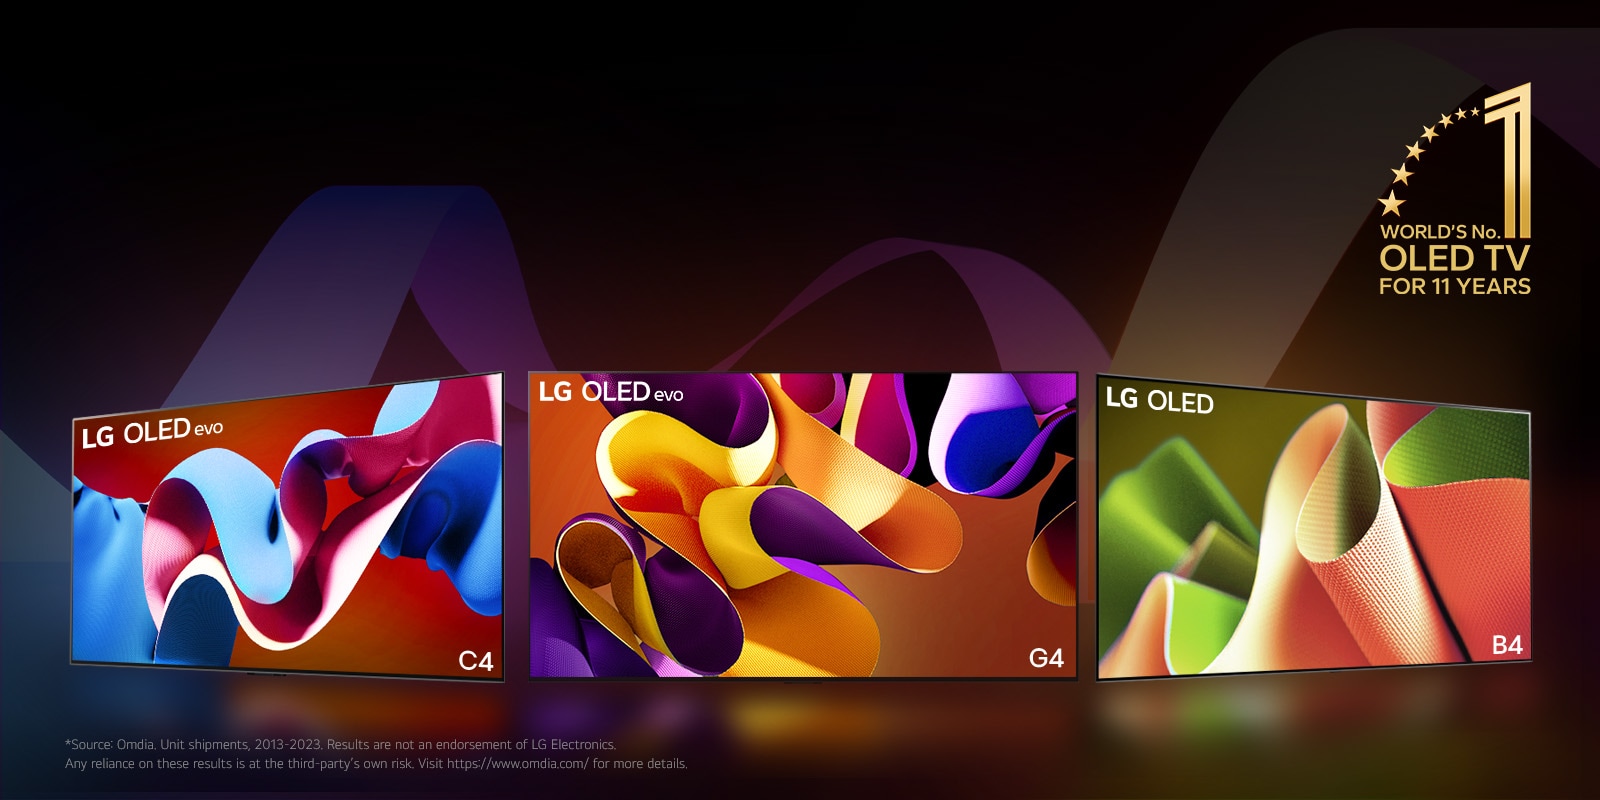 "LG OLED evo TV C4, evo G4, and B4 standing in a line against a black backdrop with subtle swirls of color. The ""World's number 1 OLED TV for 11 Years"" emblem is in the image.  A disclaimer reads: ""Source: Omdia. Unit shipments, 2013 to 2023. Results are not an endorsement of LG Electronics. Any reliance on these results is at the third party’s own risk. Visit https://www.omdia.com/ for more details."""